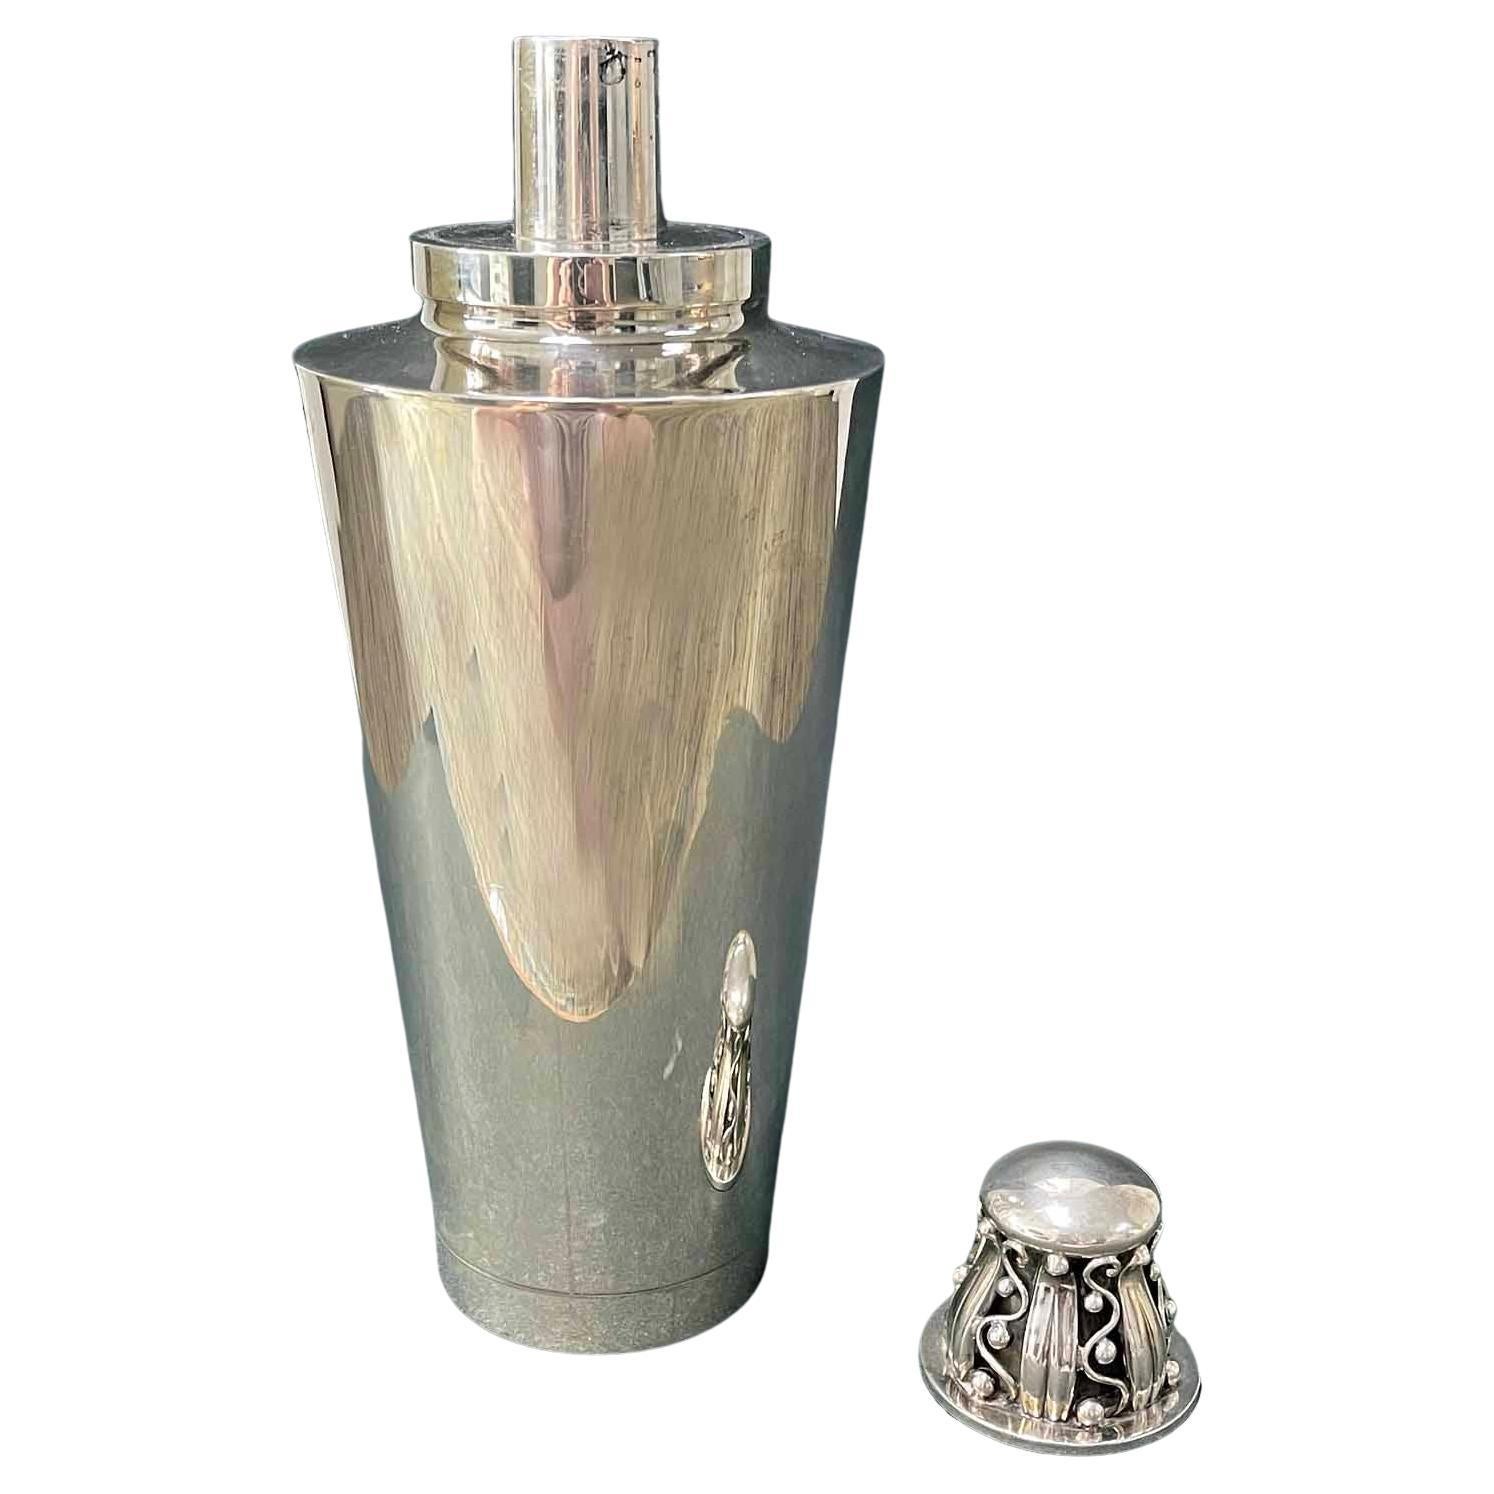 A unique and exceptional example of fine Art Deco silver artisanry, this sterling cocktail shaker by Evald Nielsen is surmounted by a domed cap with a vine-and-leaf motif. The sloping body of the shaker is elegant and streamlined, contrasting with